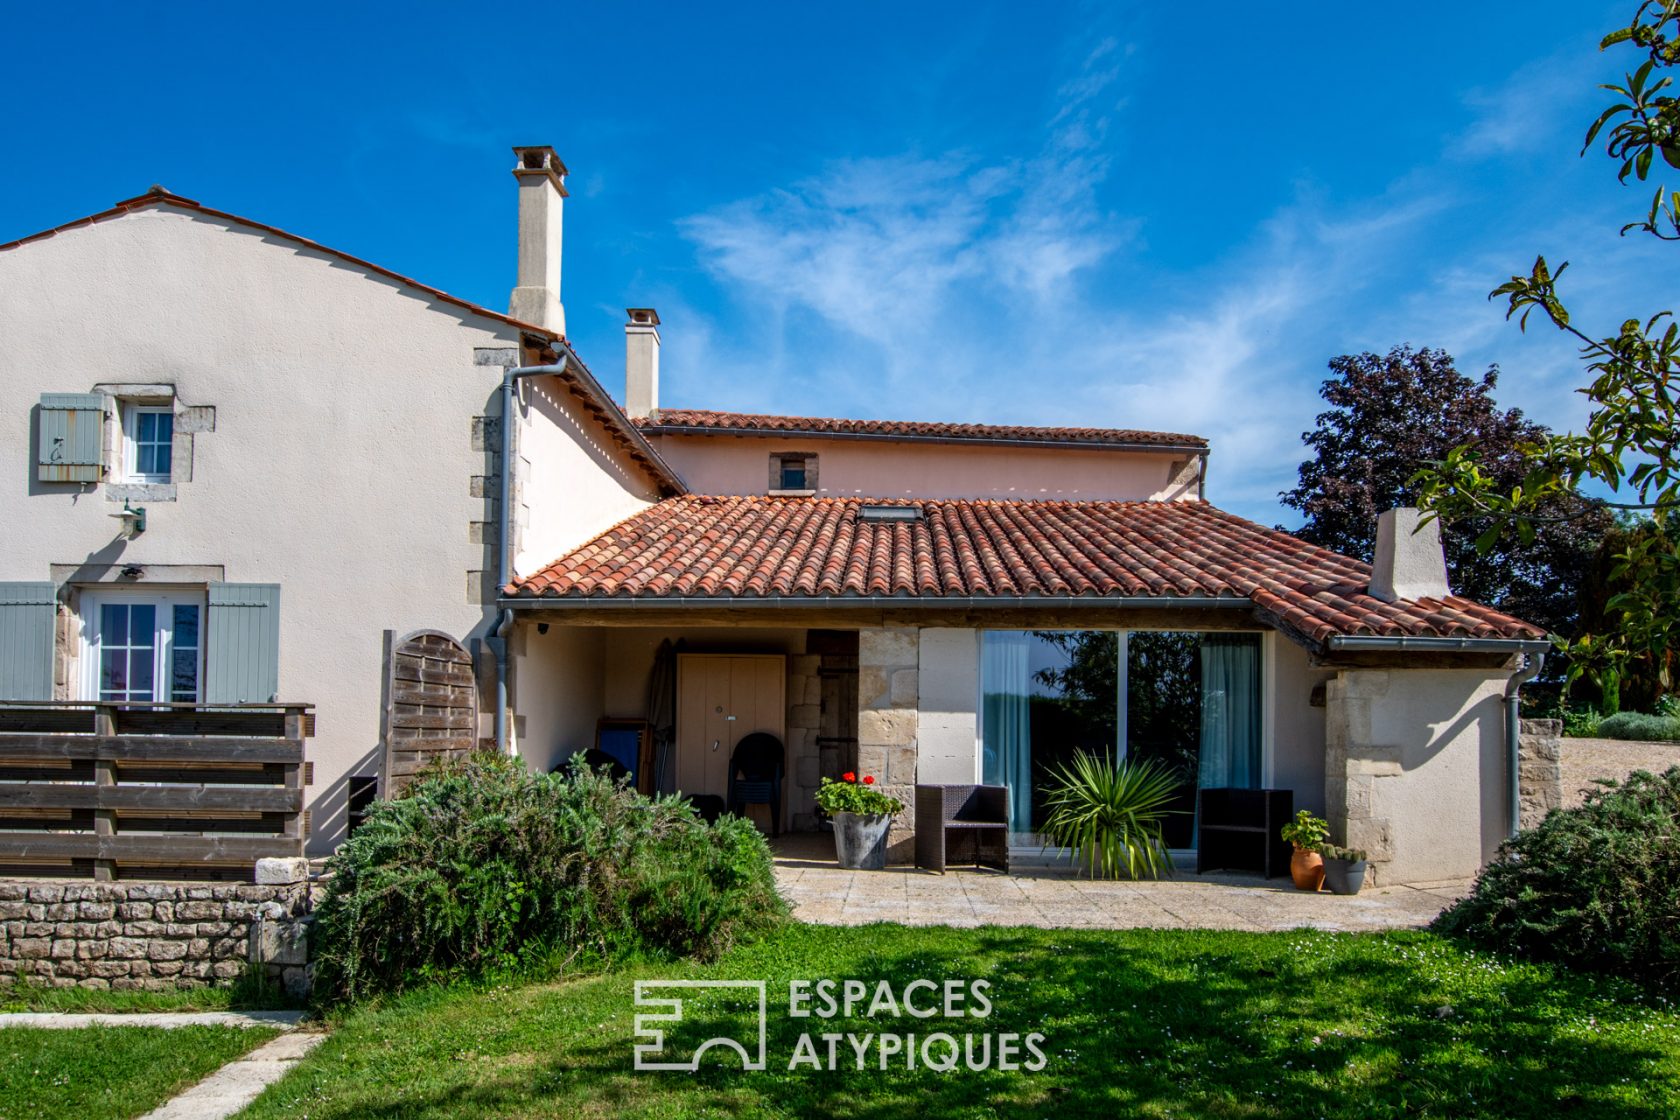 Charming 18th century property with gîtes and wellness area